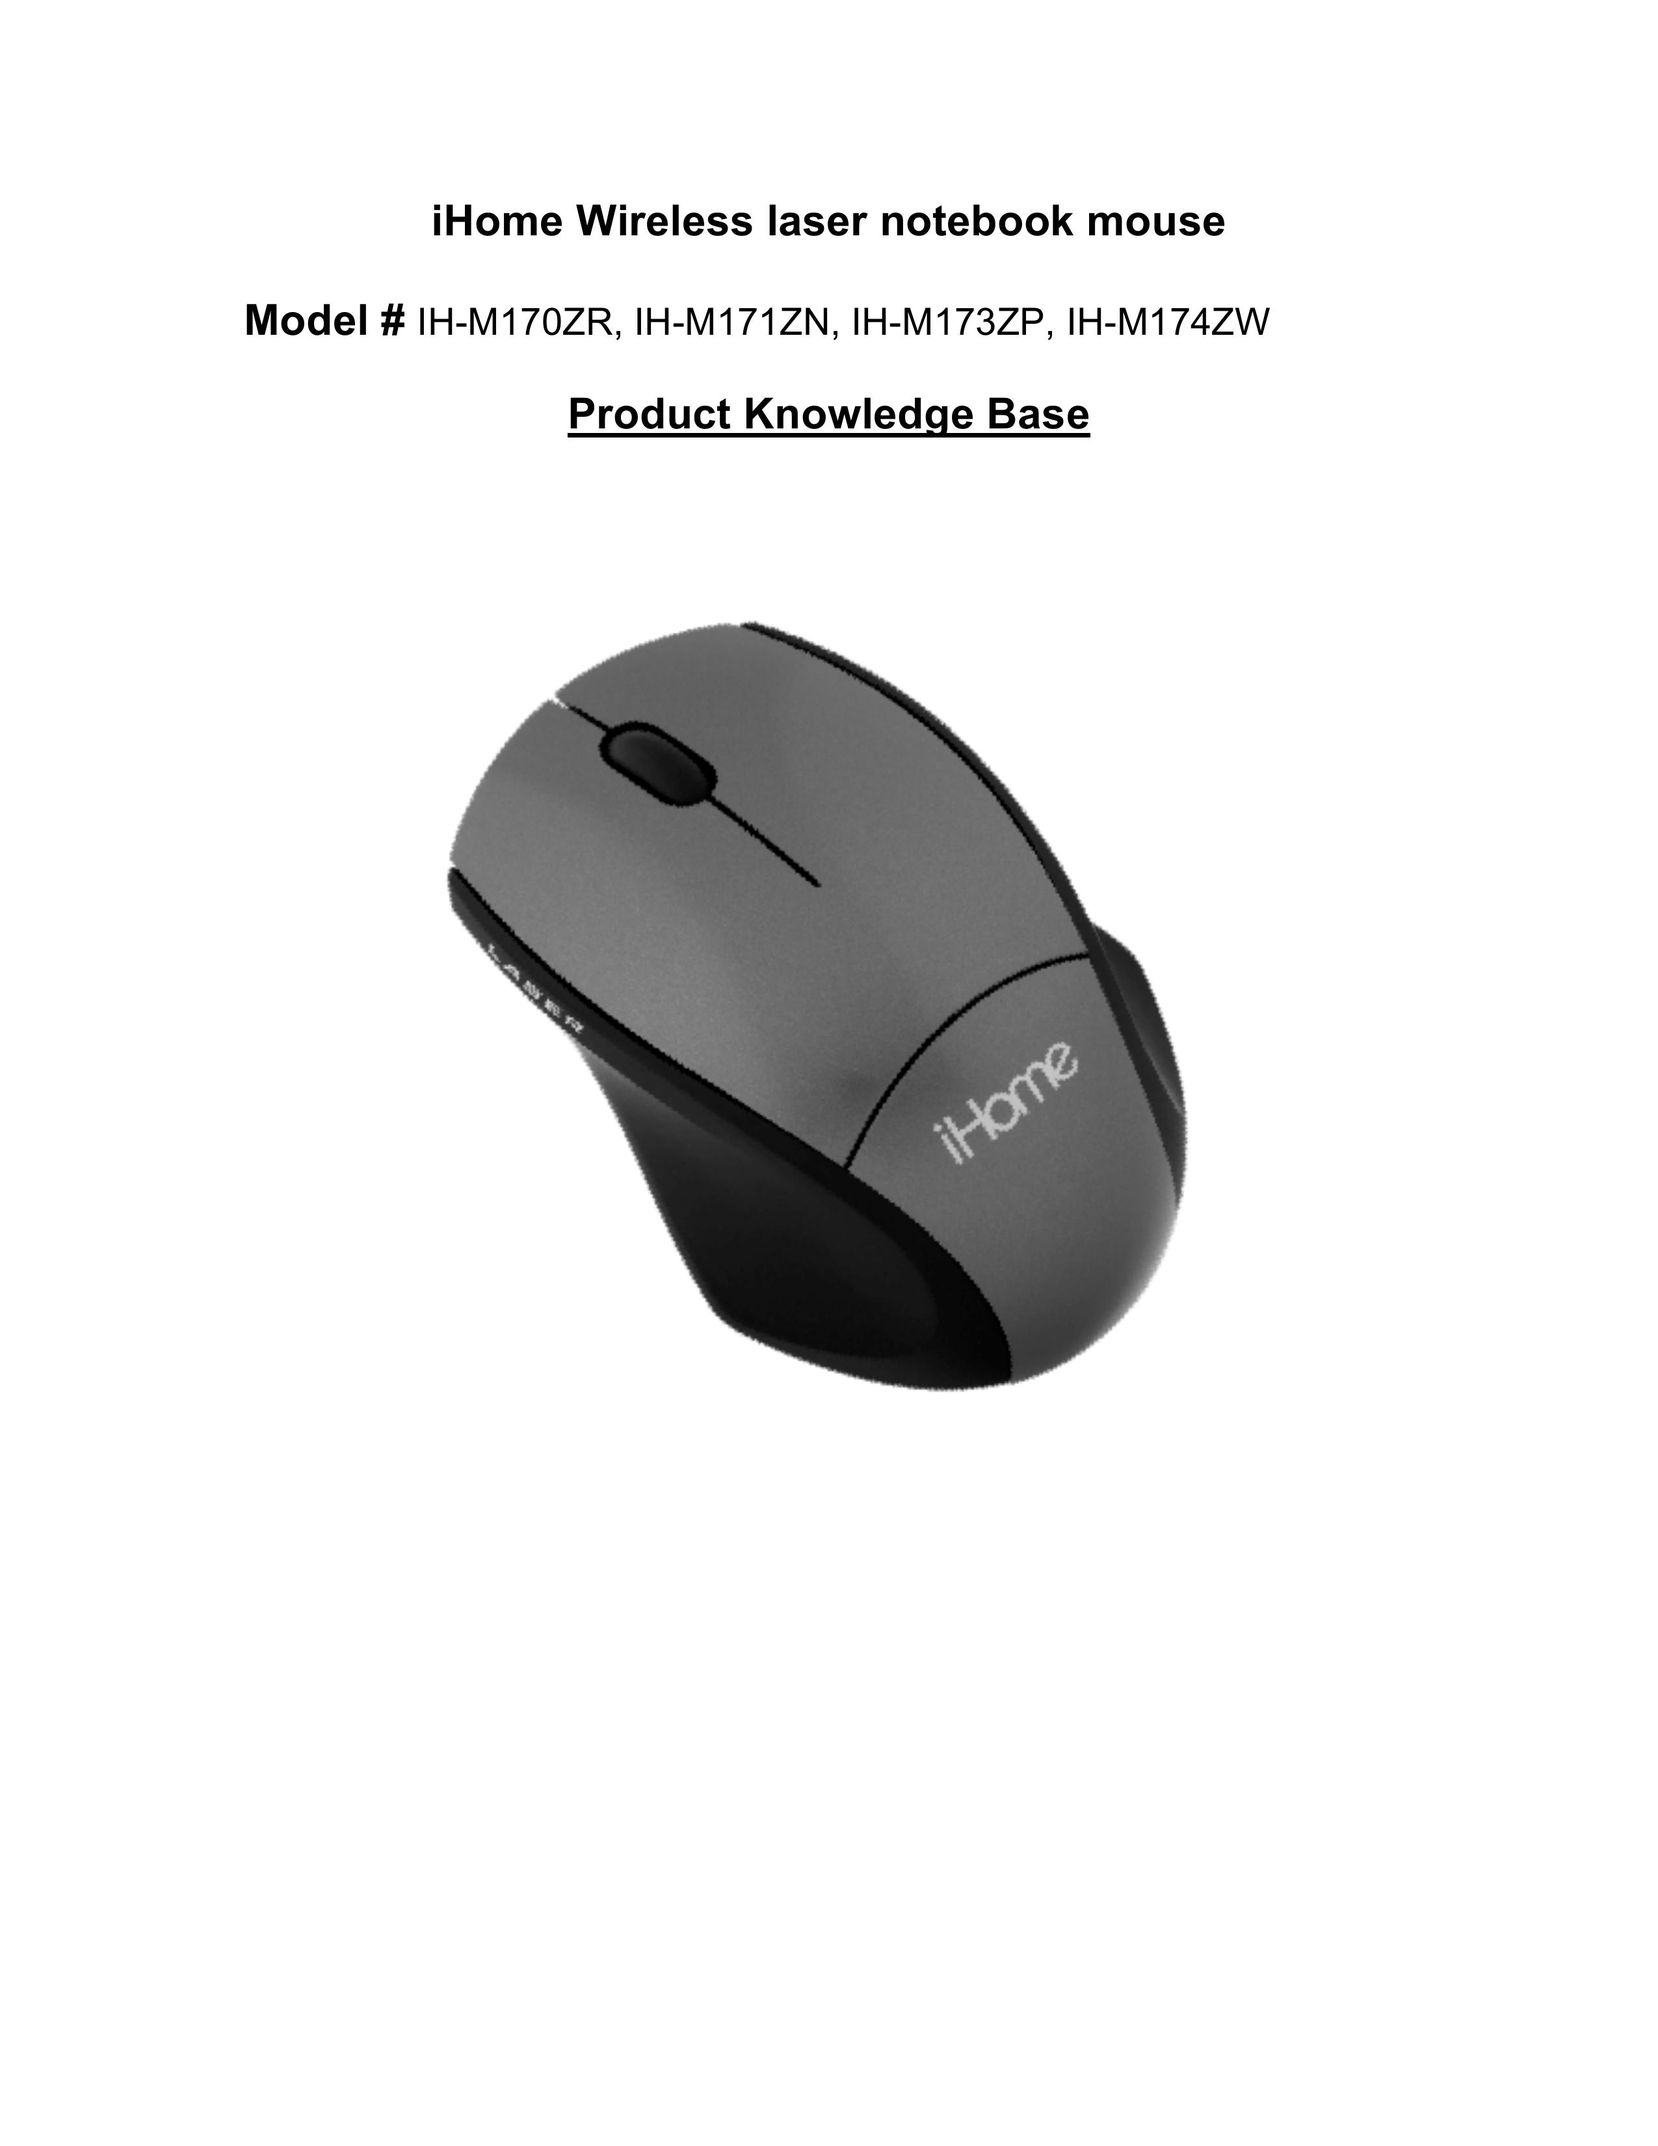 iHome IH-M174ZW Mouse User Manual